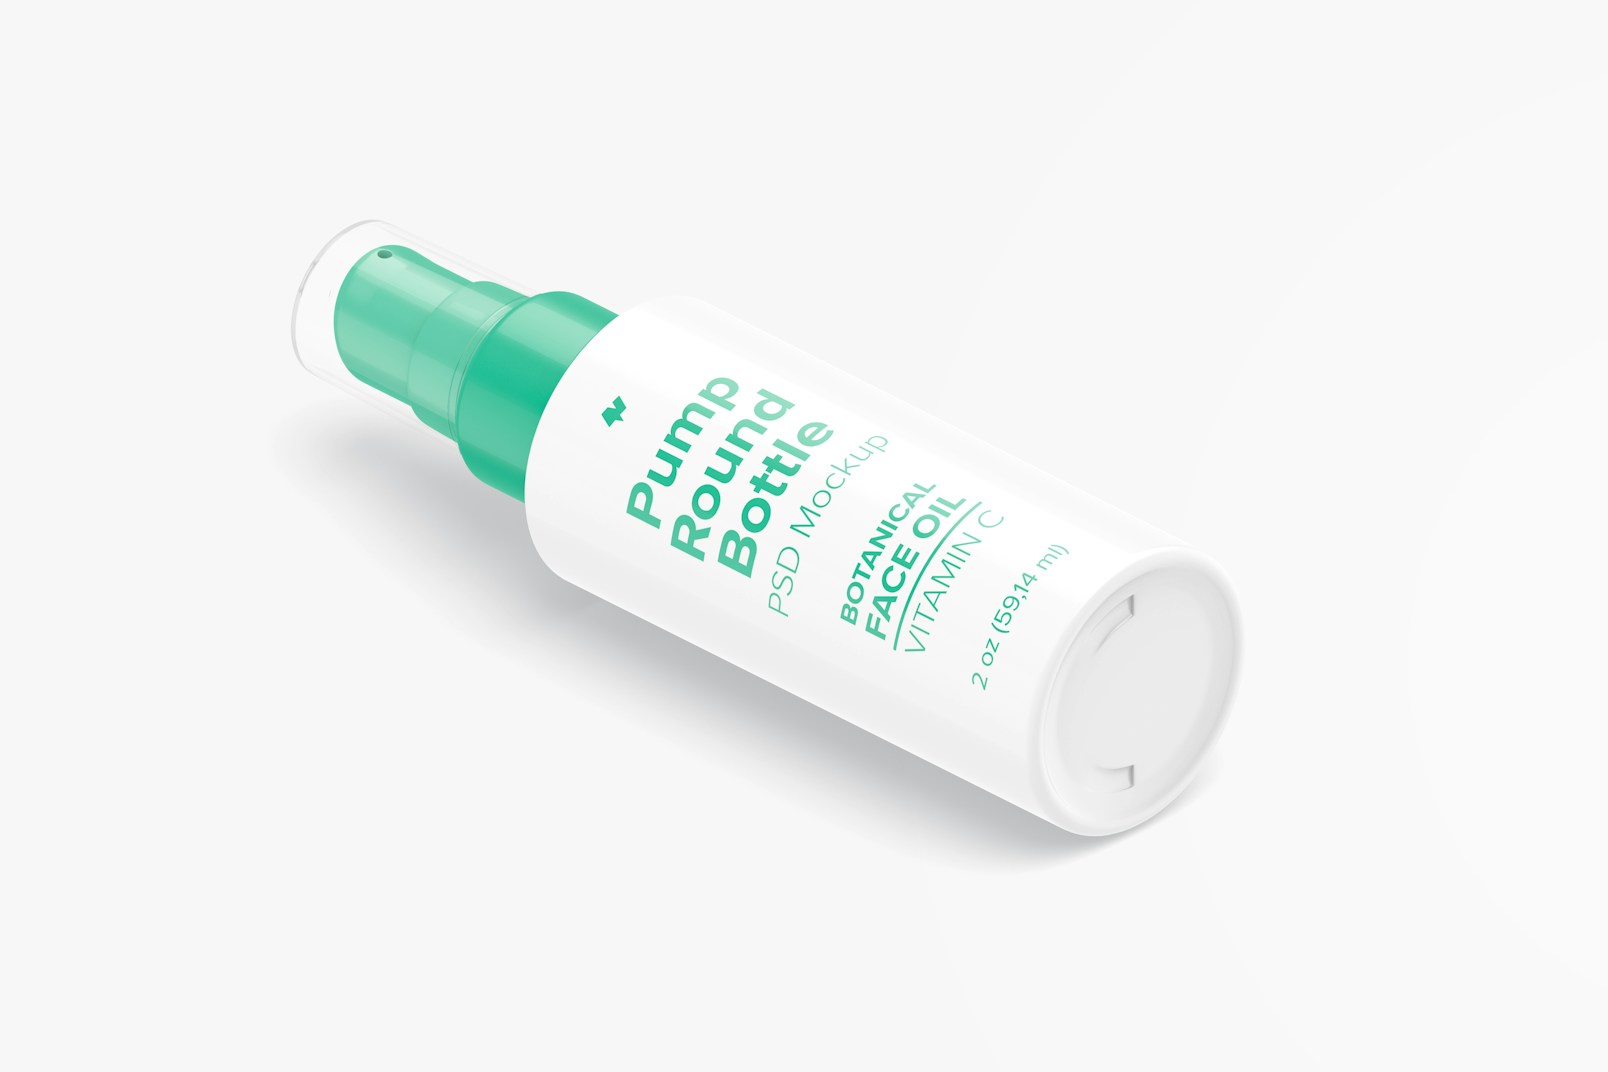 2 oz Pump Round Bottle Mockup, Isometric Right View